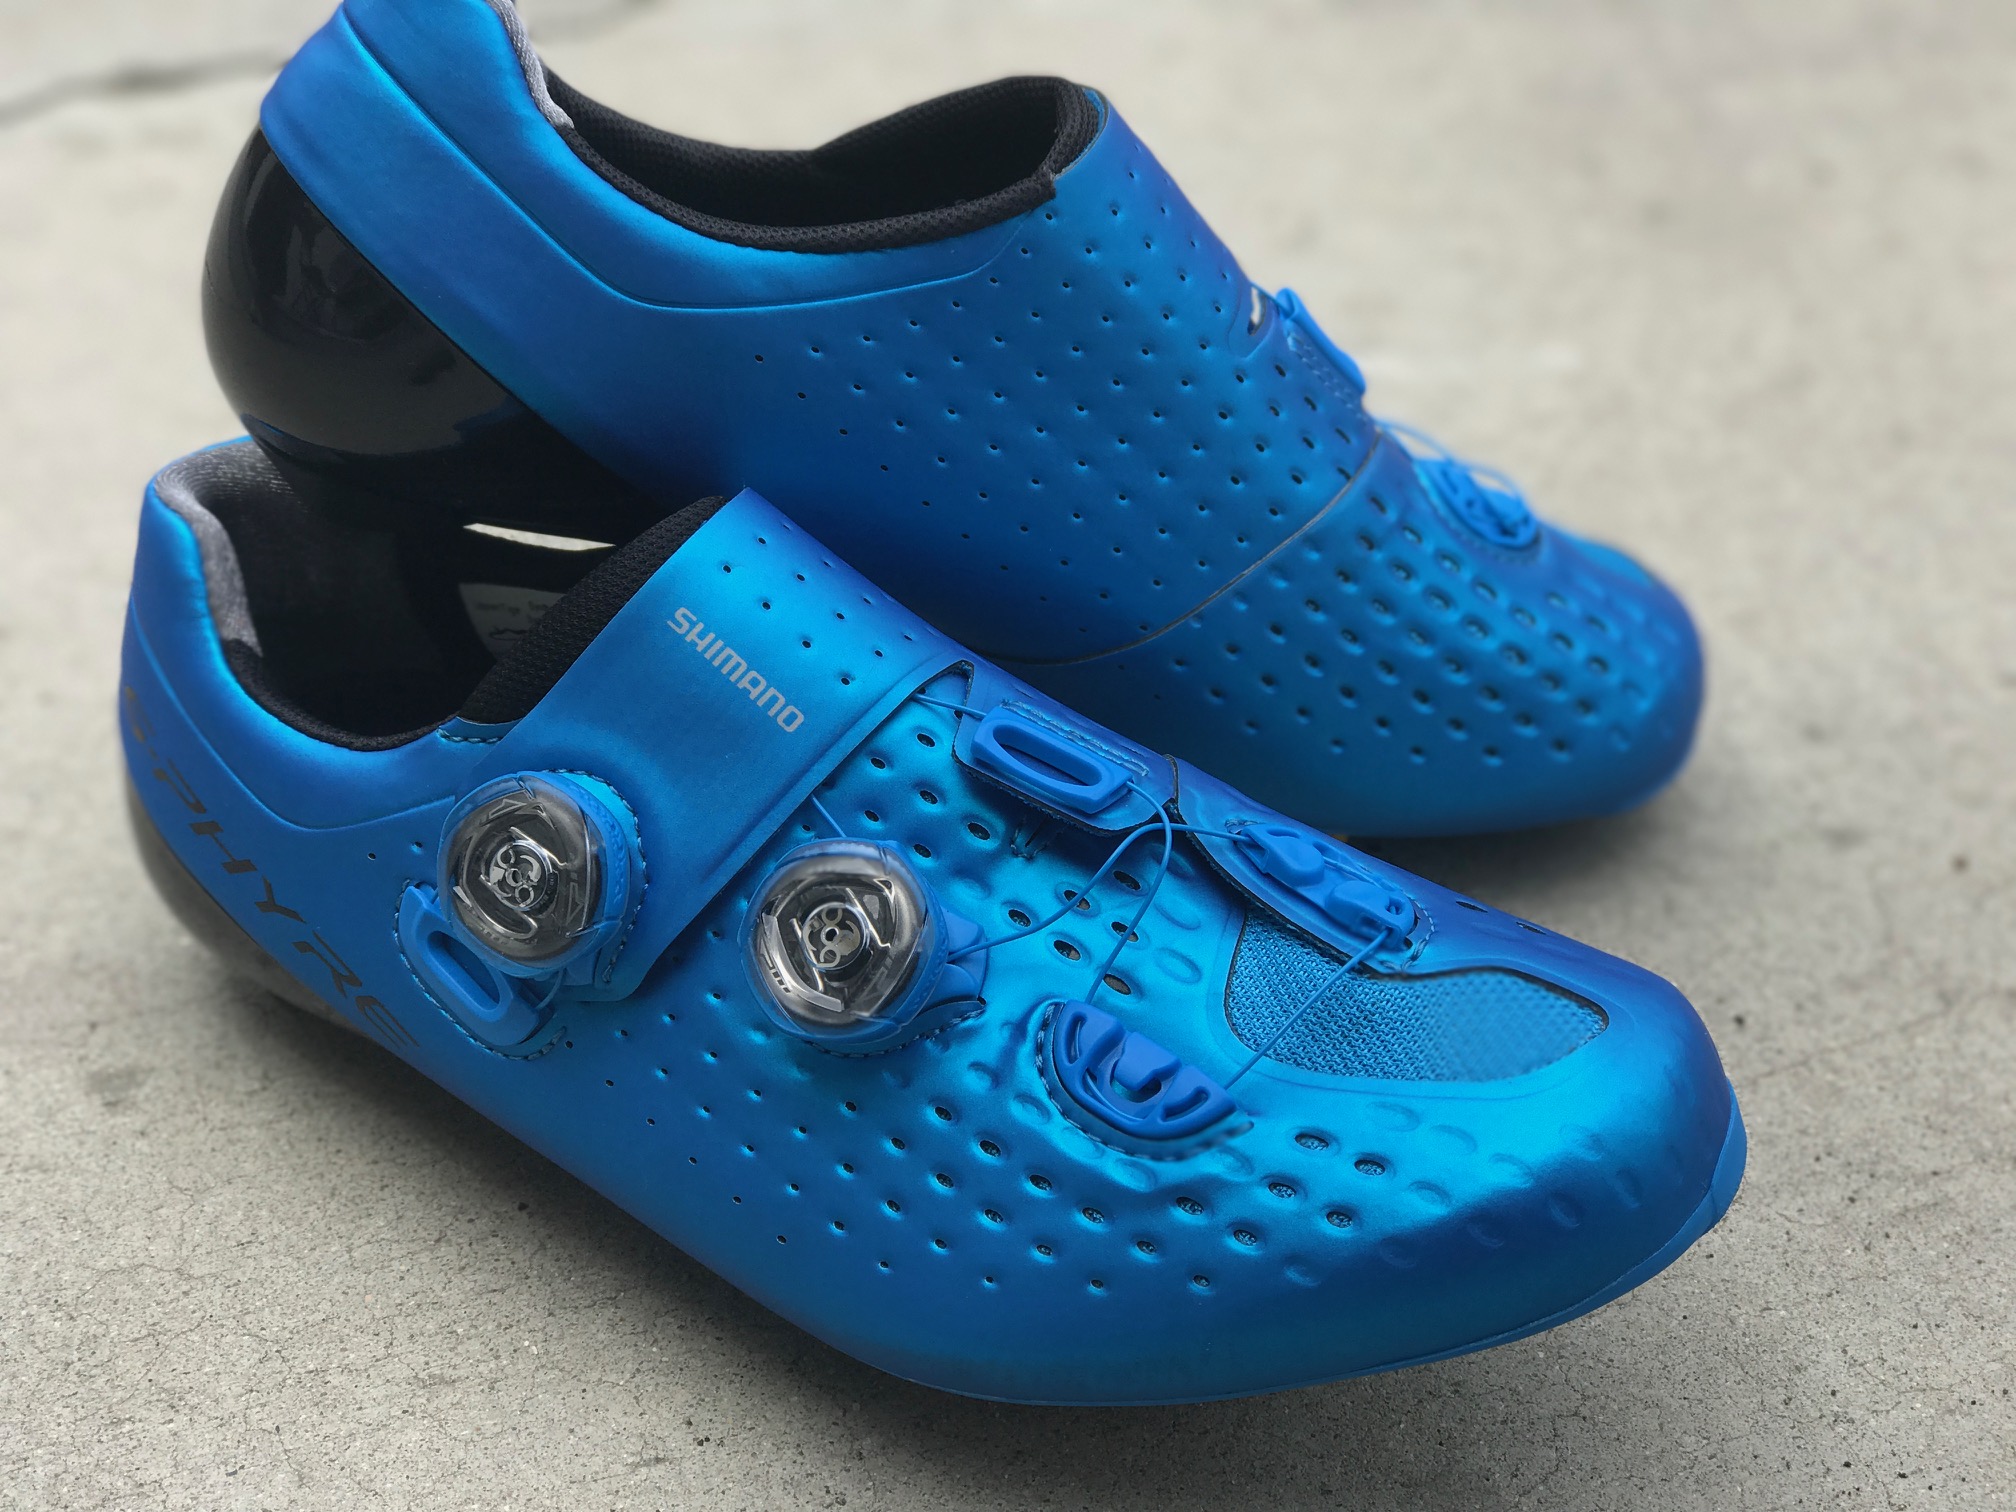 Shimano RC9 S-Phyre, My New Favorite 